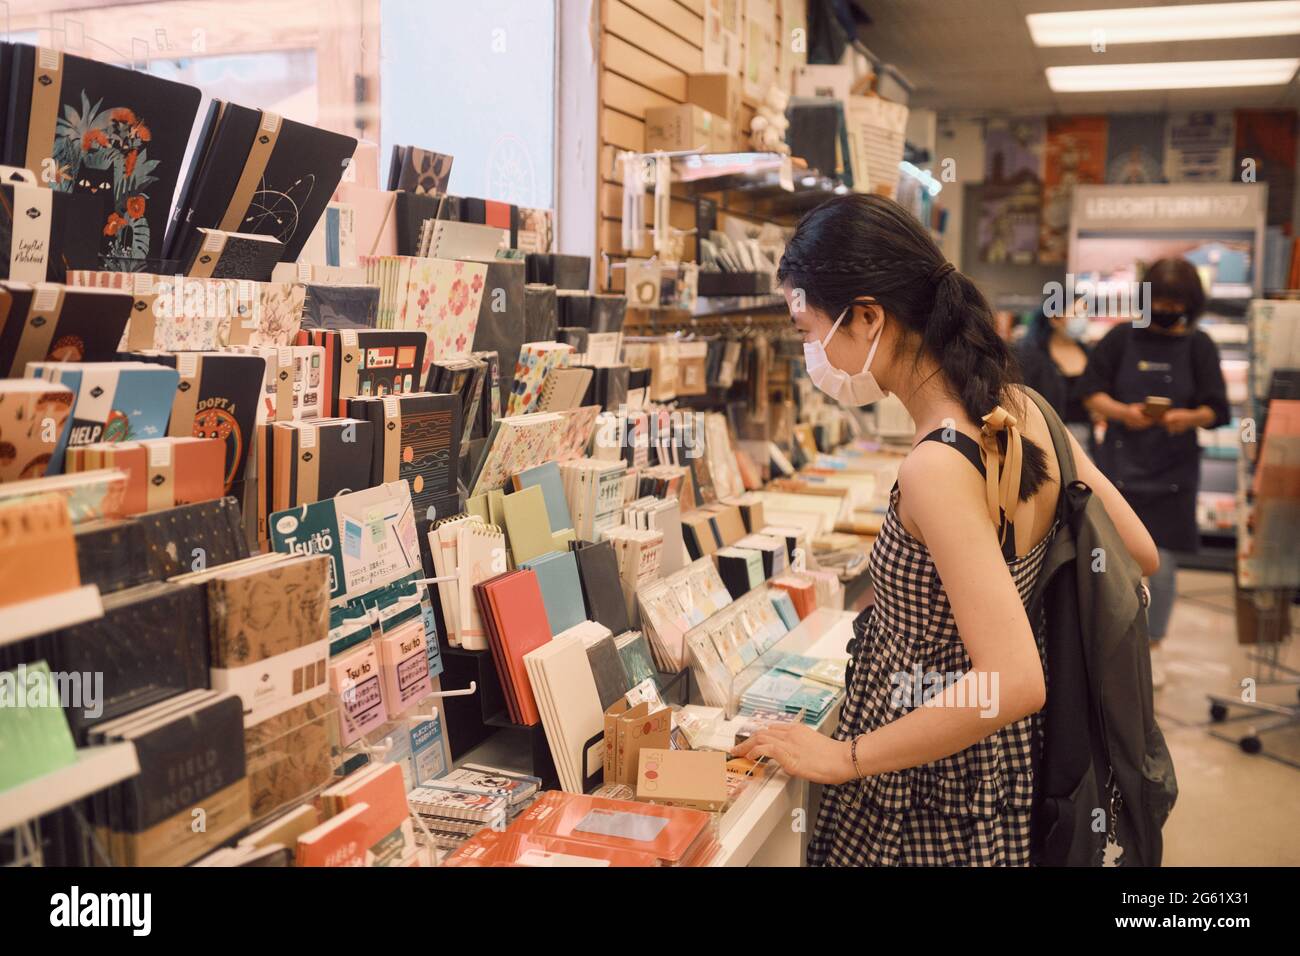 Girl with backpack browsing notebook display at Kinokuniya Bookstore in Little Tokyo. Stock Photo